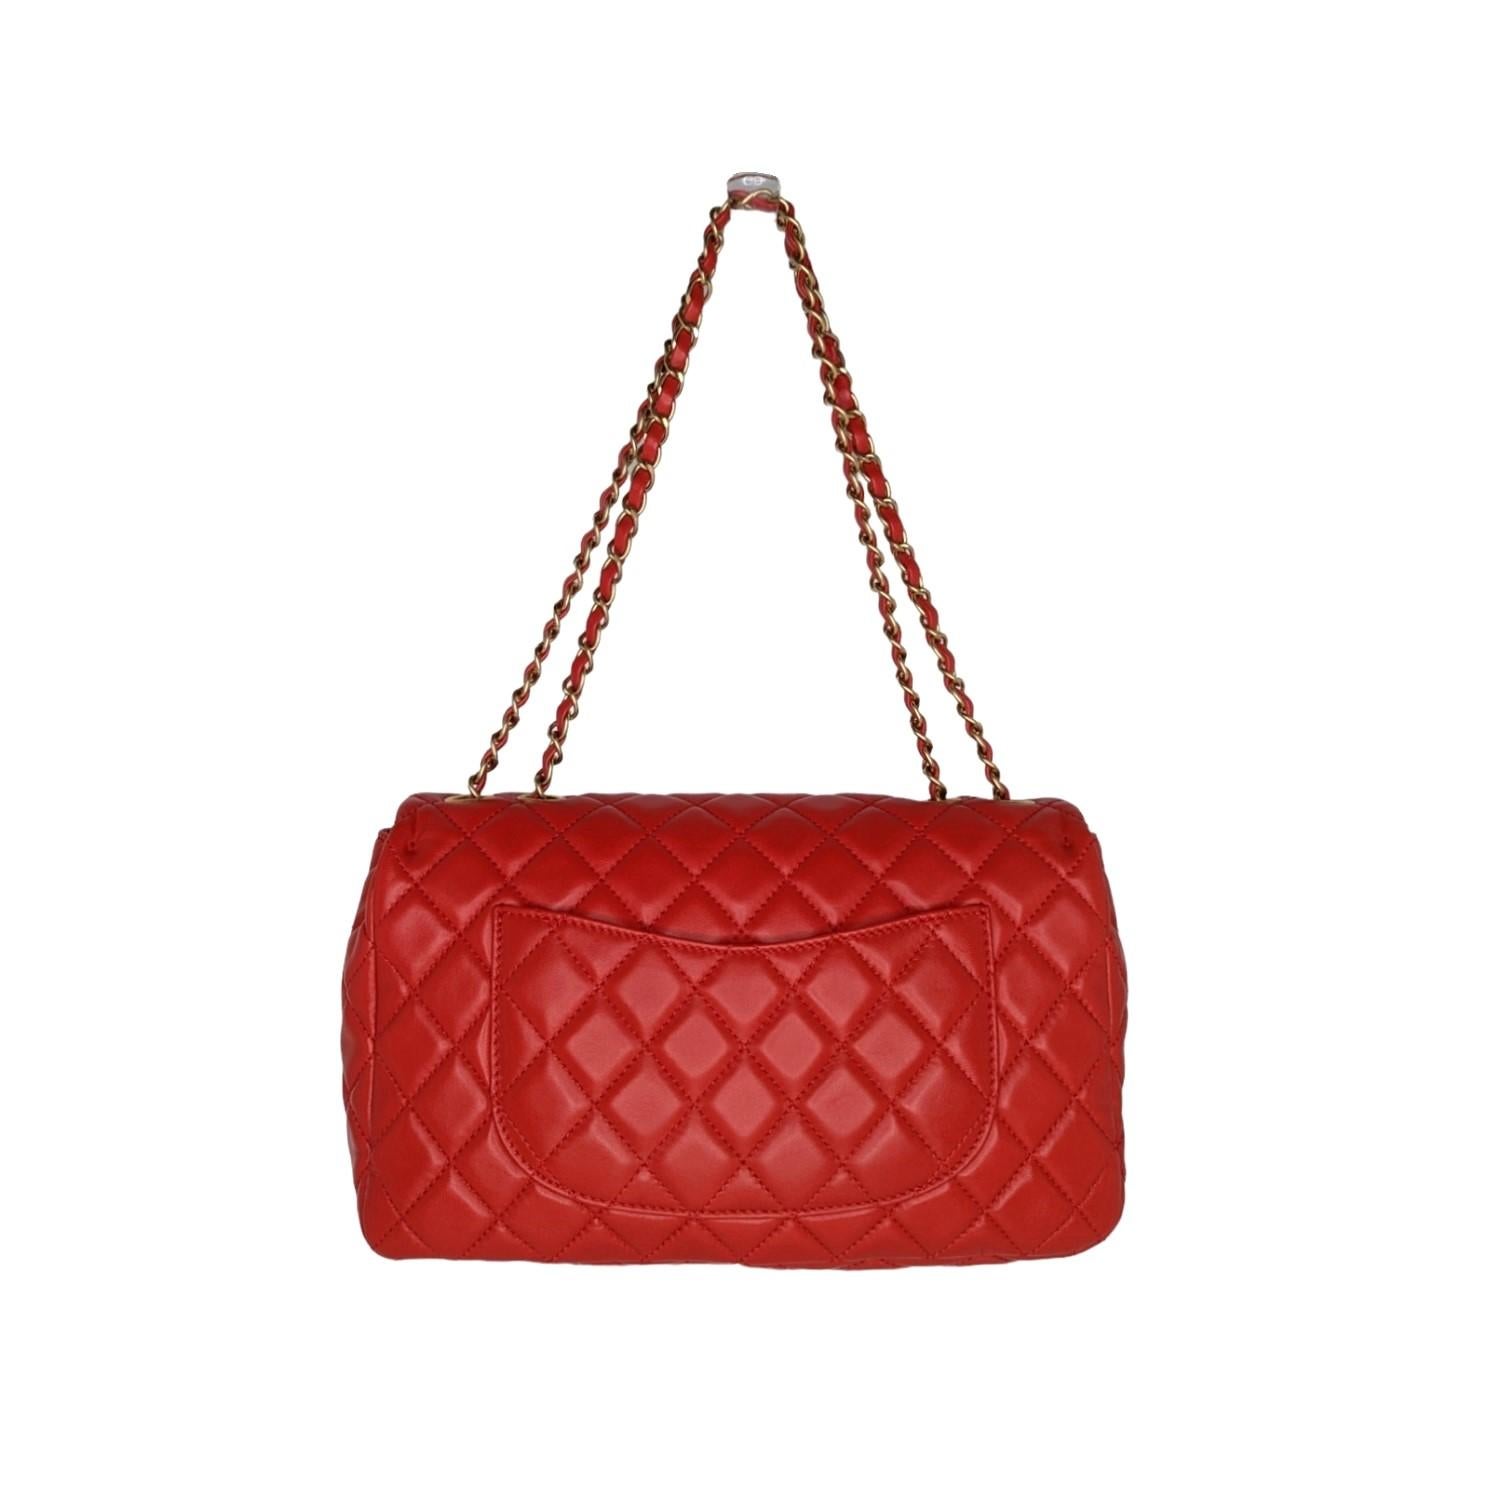 The classic features and exceptional quality of this Chanel shoulder bag lend a look of timeless elegance for day or evening. The bag is a large, structured shoulder bag that is crafted of lambskin diamond quilted leather in red. This bag features